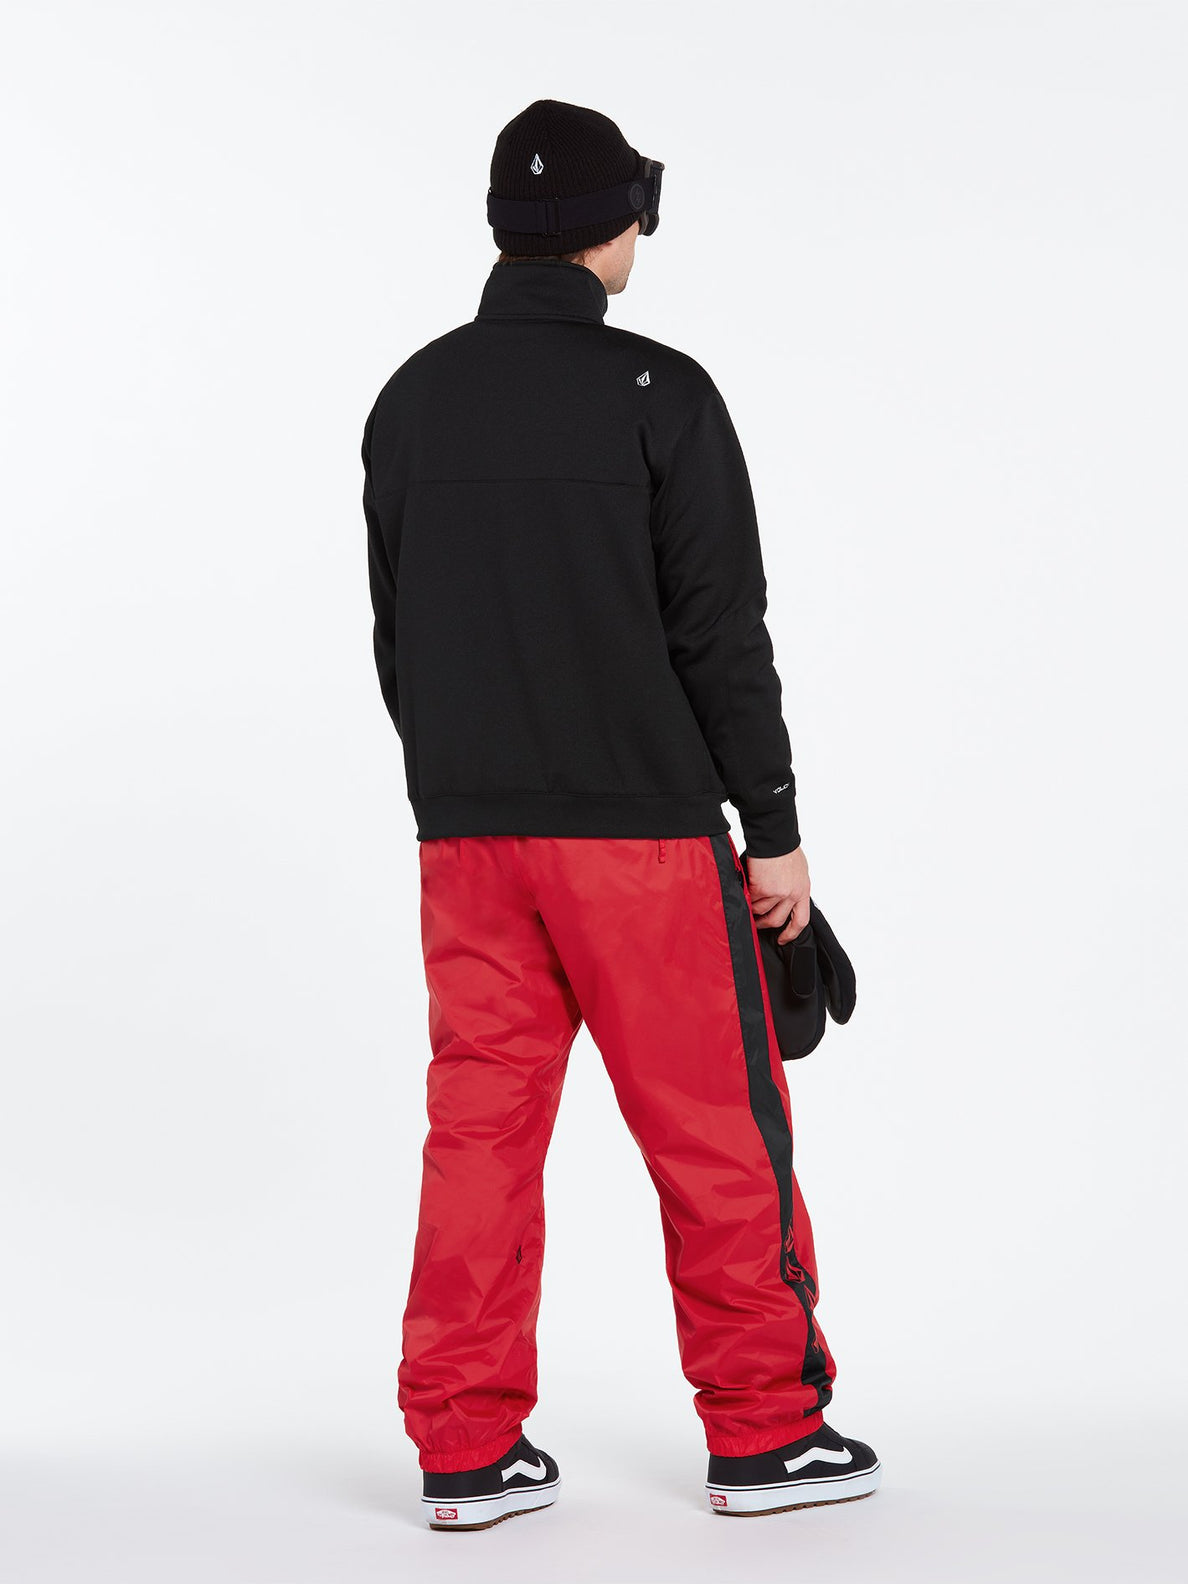 Slashlapper Trousers - RED (G1352210_RED) [73]